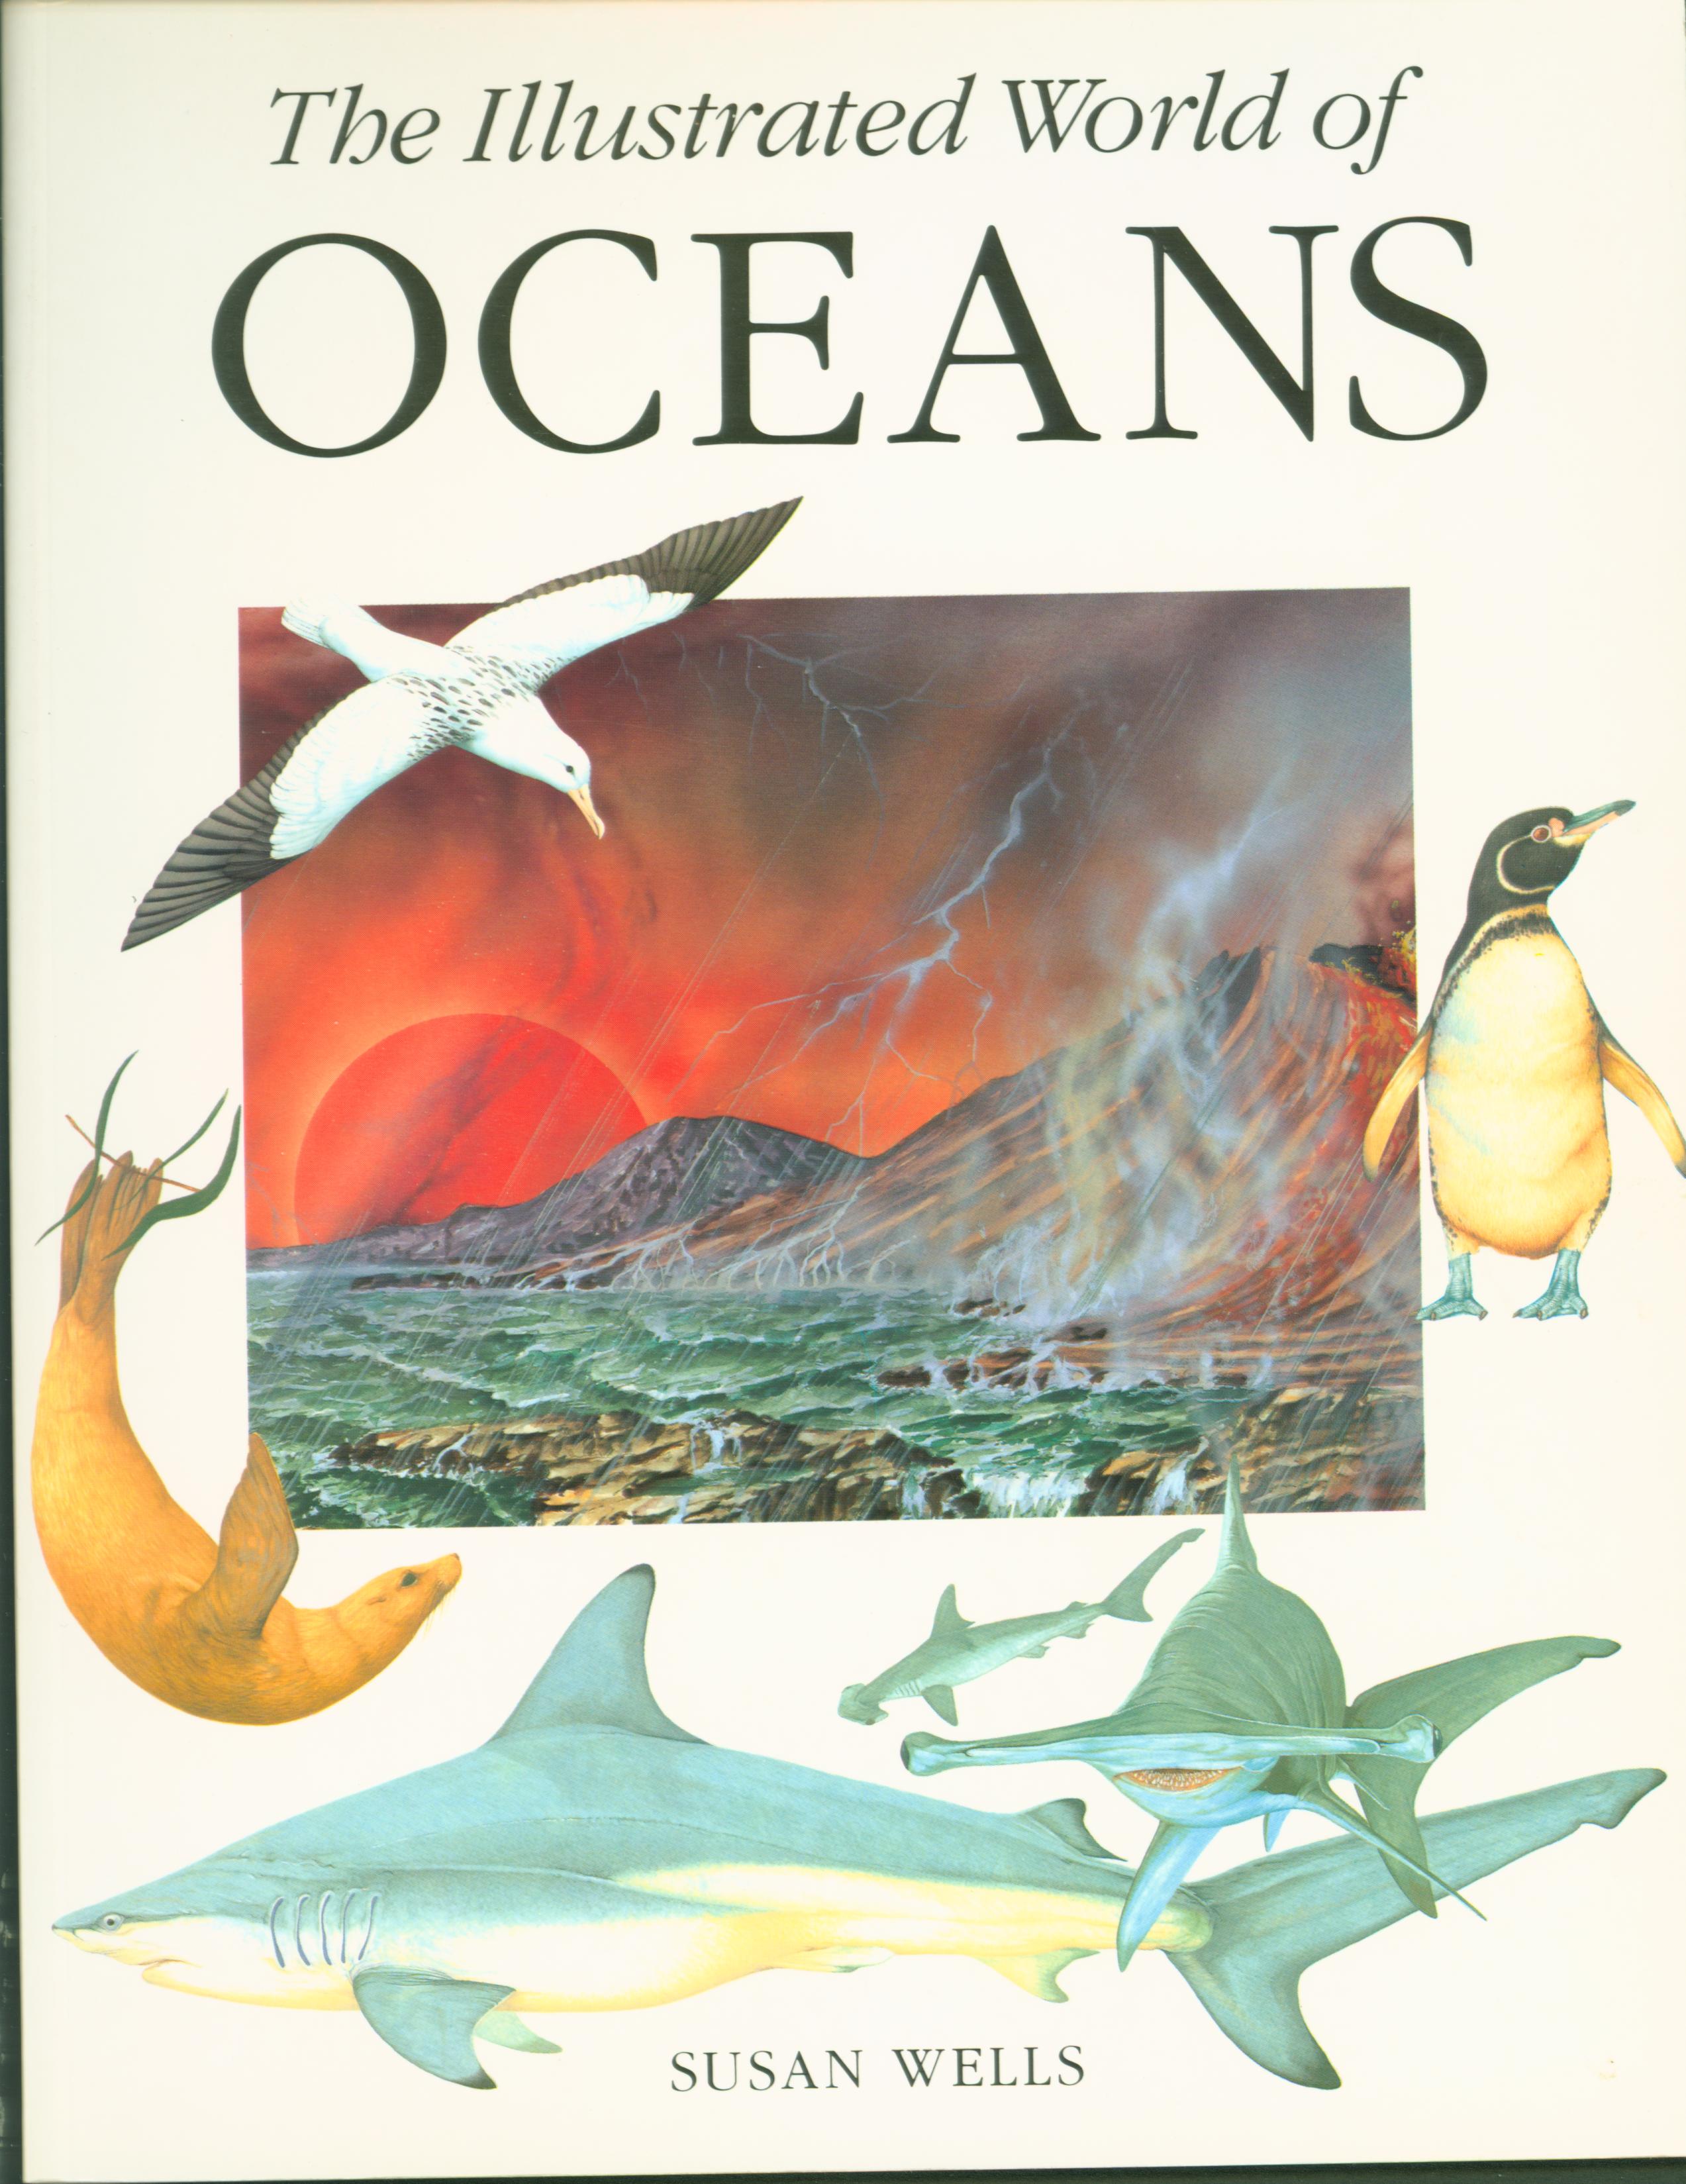 THE ILLUSTRATED WORLD OF OCEANS.